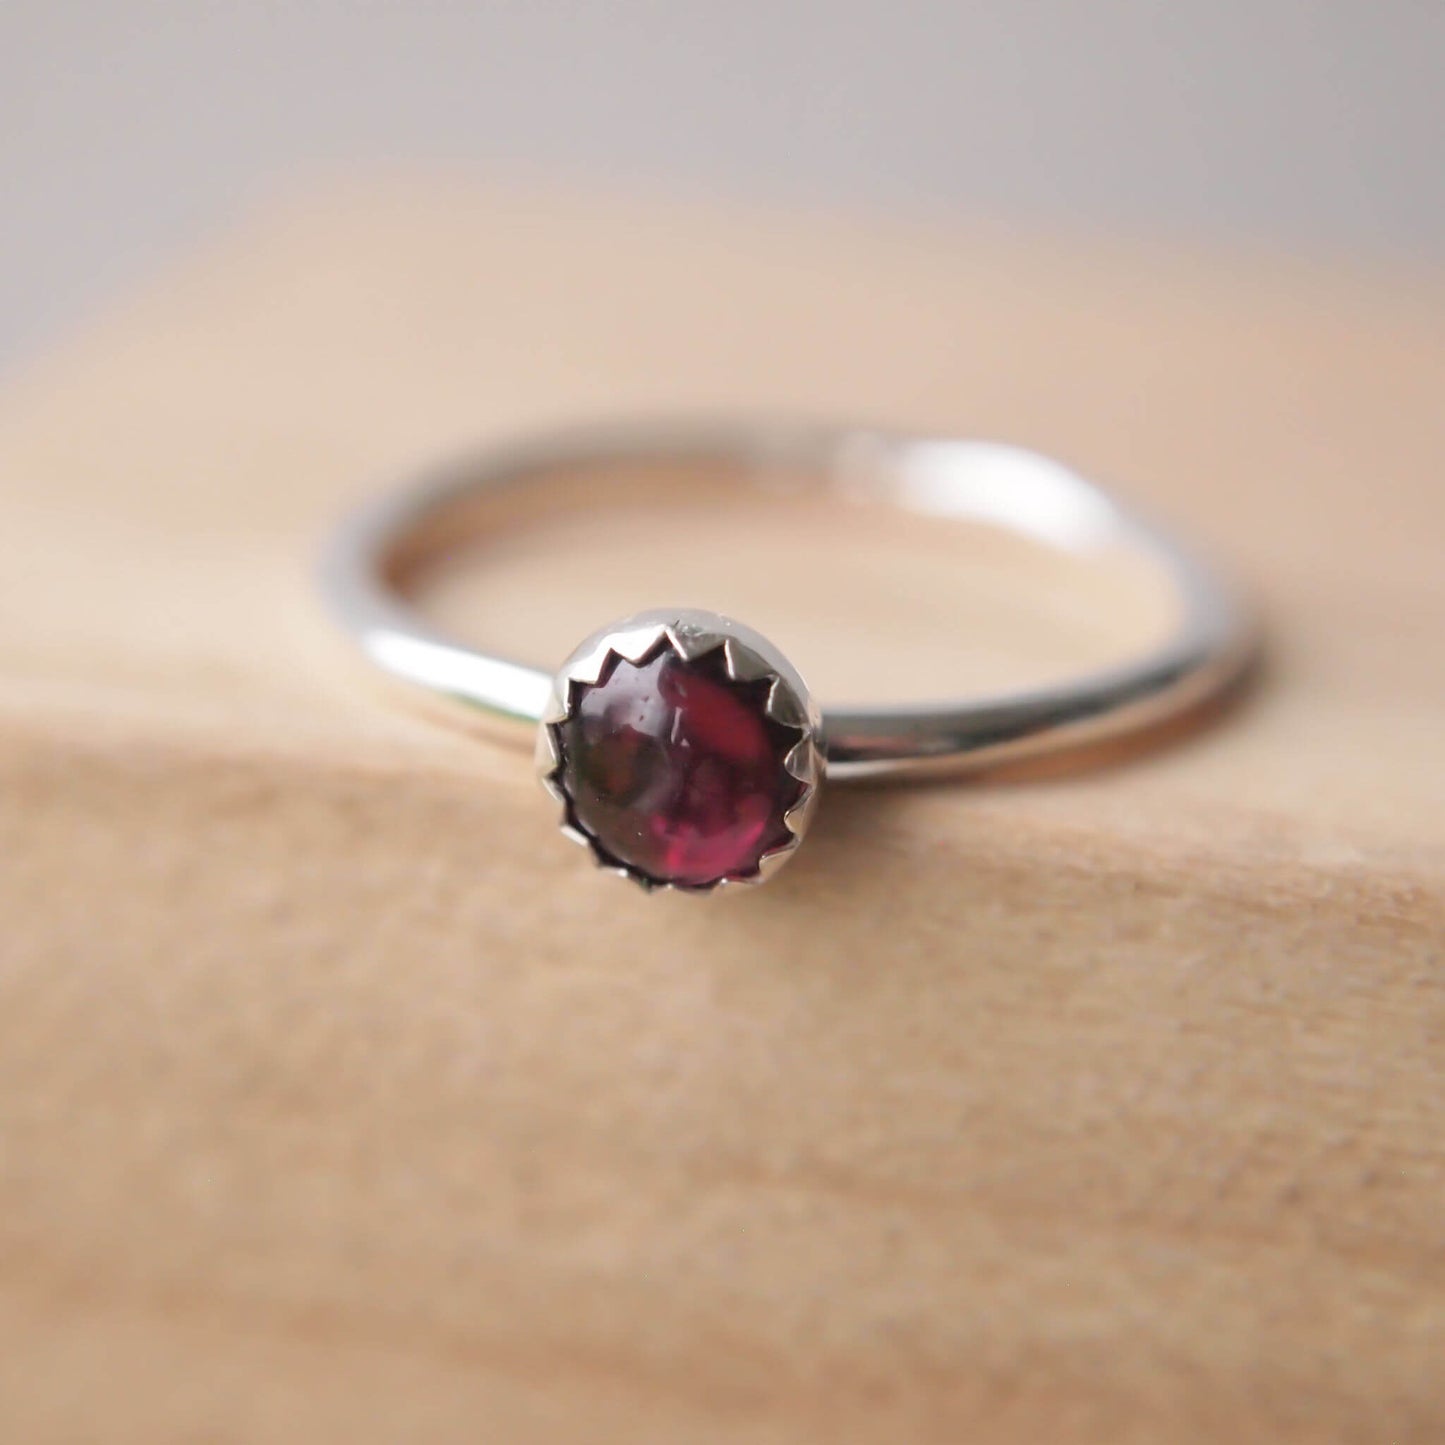 Simple styled silver and dark red gemstone ring with a Garnet round stone on a silver band. The ring is made from a 5mm round cabochon in deep red. Handmade to your choice of ring size by maram jewellery in Scotland